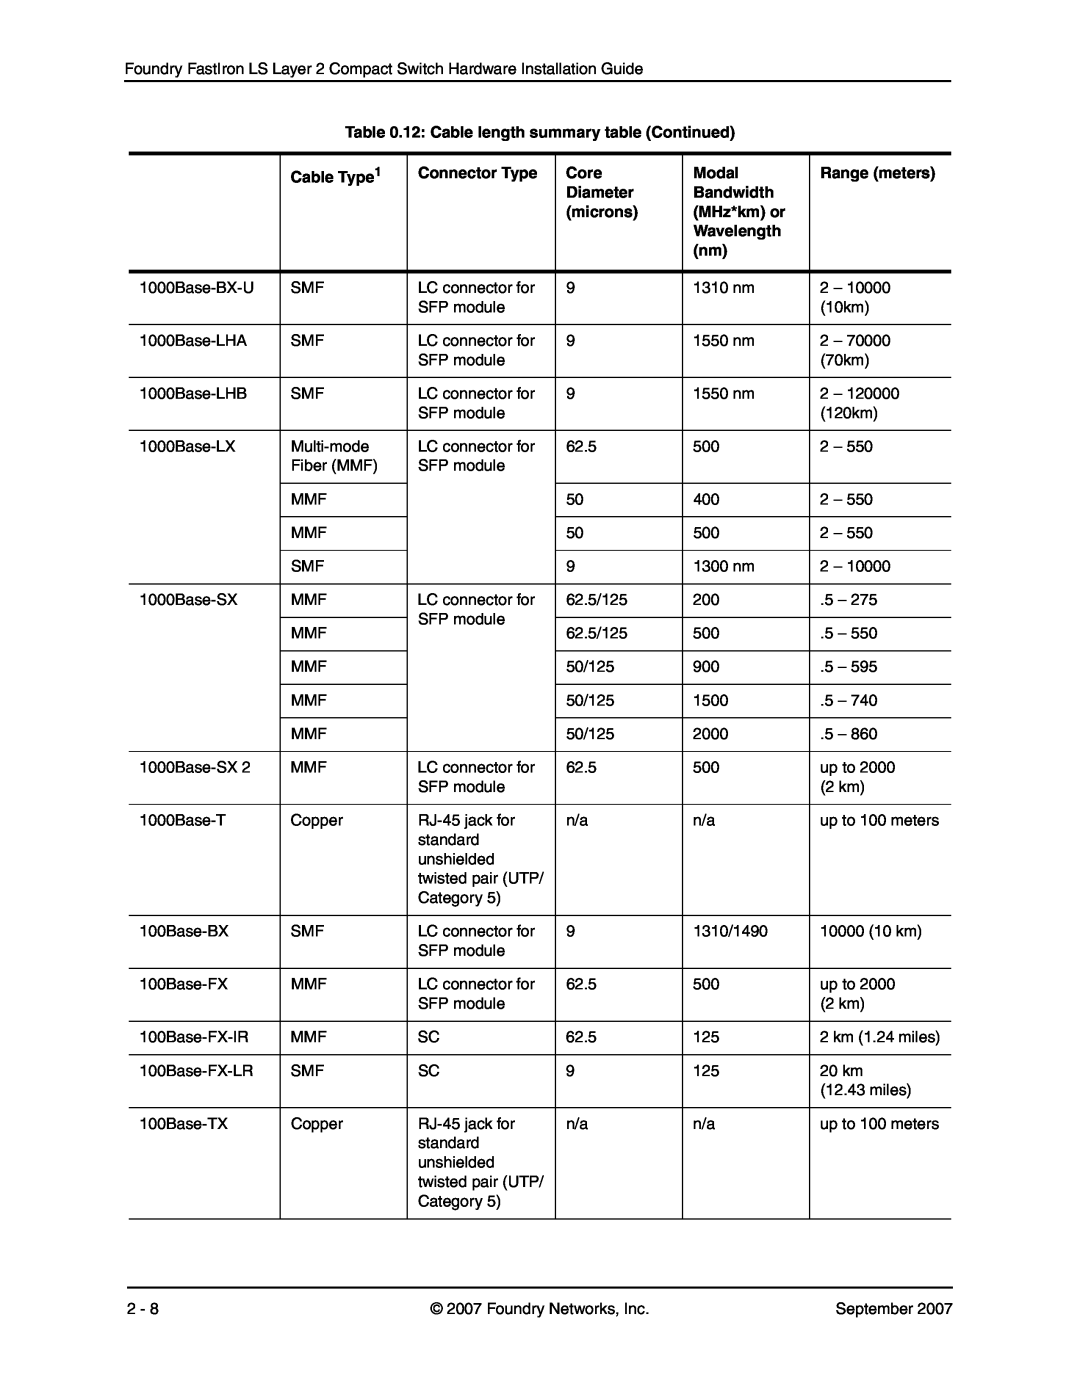 Foundry Networks LS 624 12 Cable length summary table Continued, Cable Type, Connector Type, Core, Modal, Range meters 